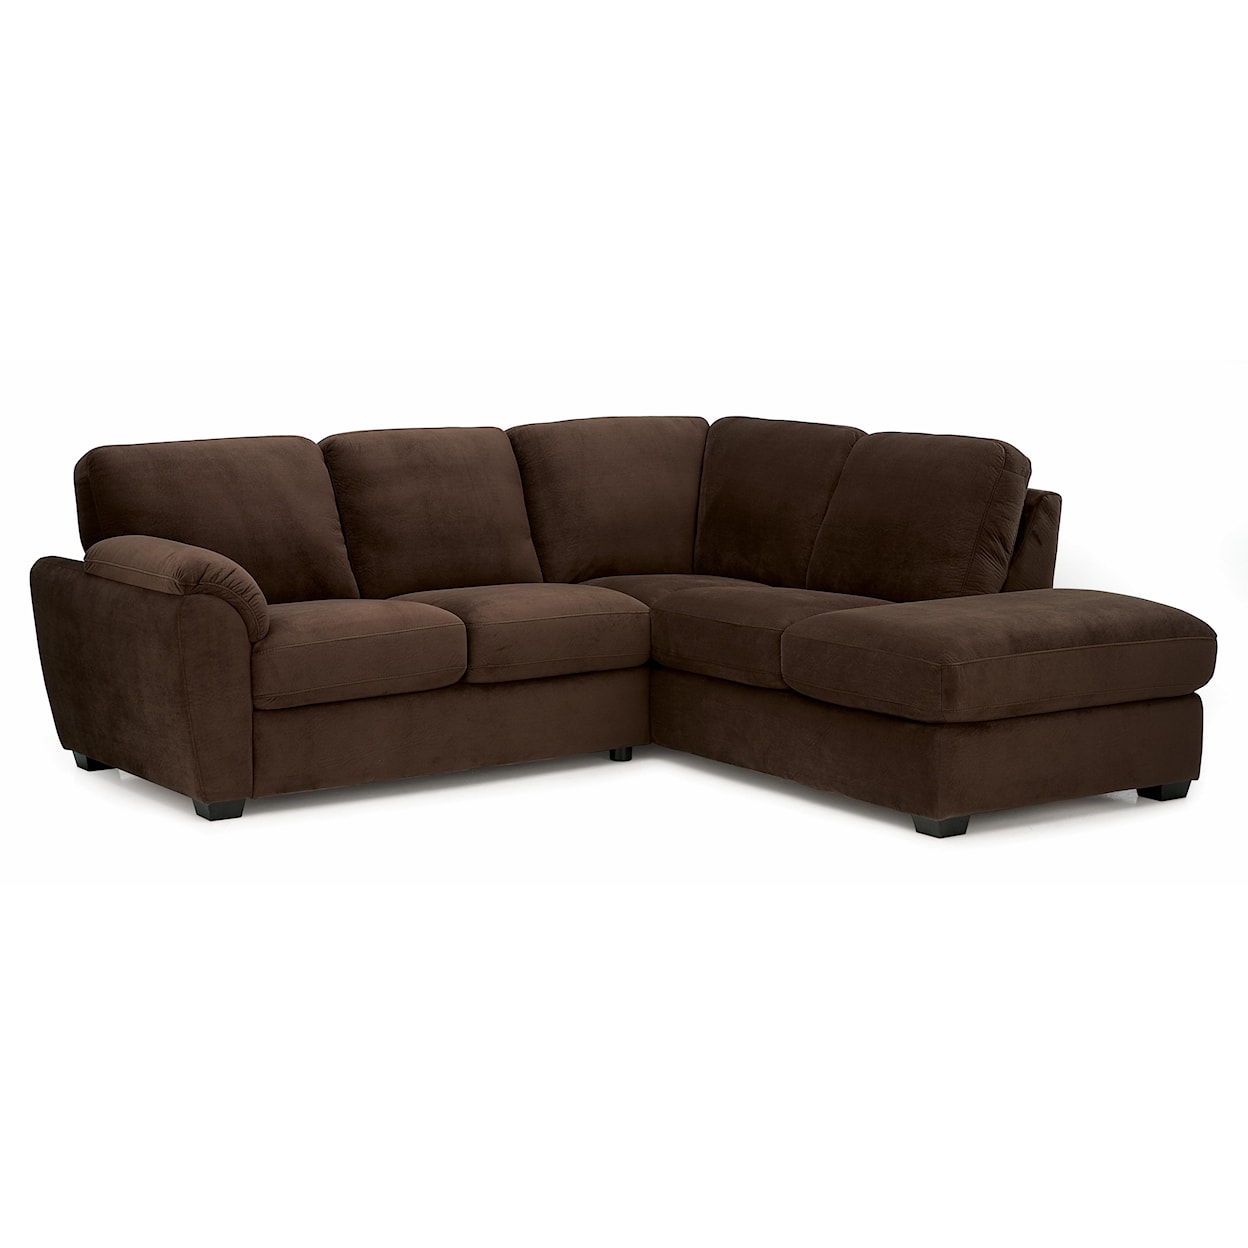 Palliser Lanza Two Piece Sectional Sofa with LHF Chaise